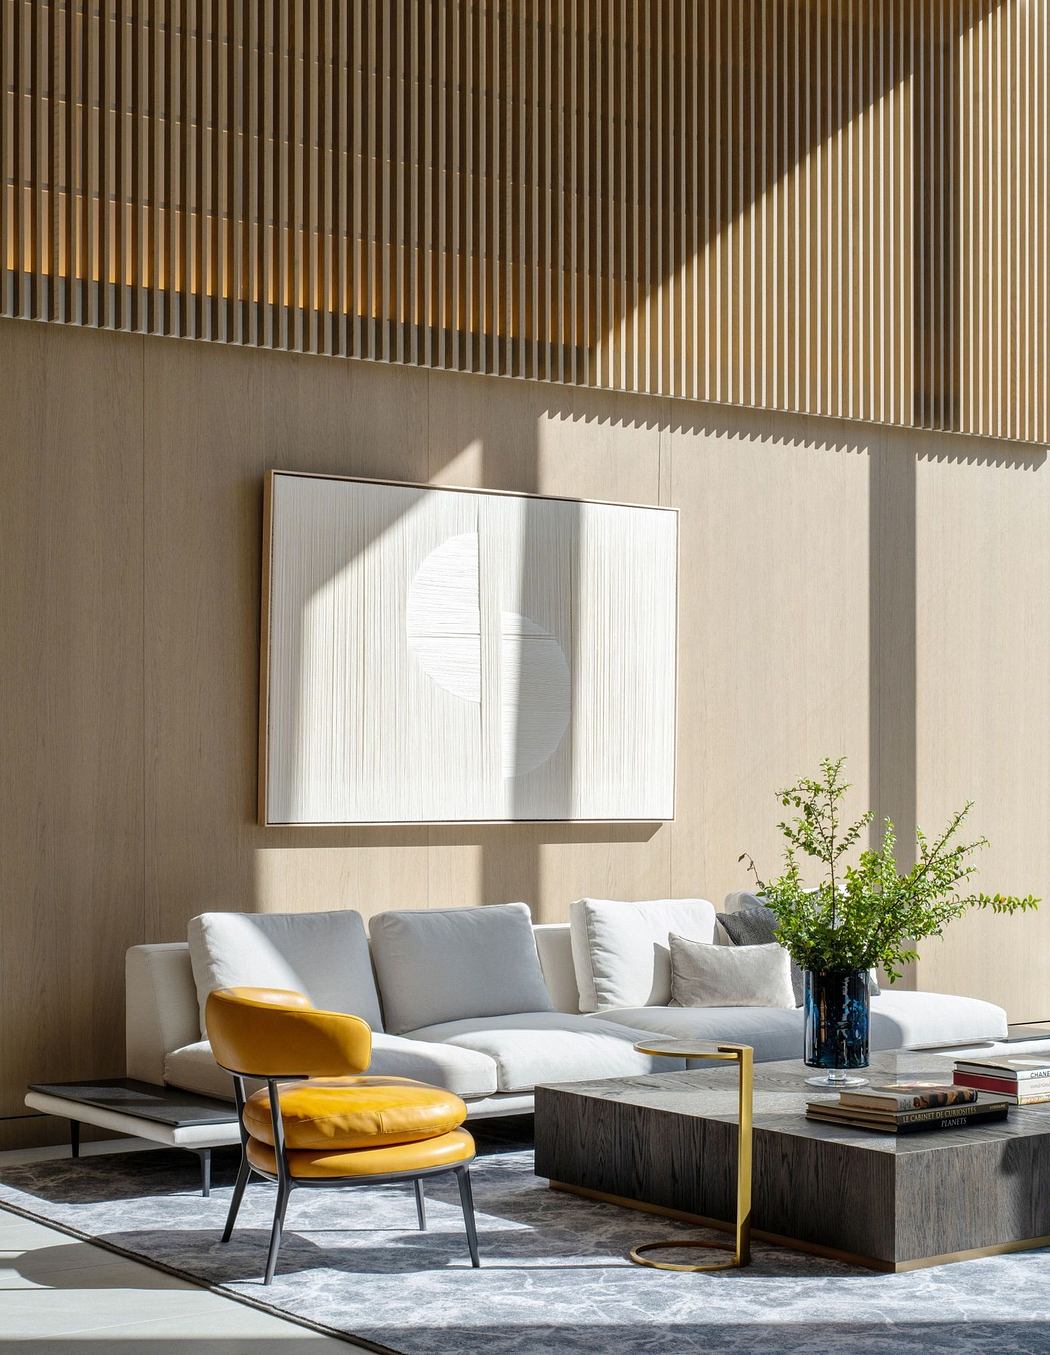 Modern living room with wooden slatted walls, a white sofa, and a yellow